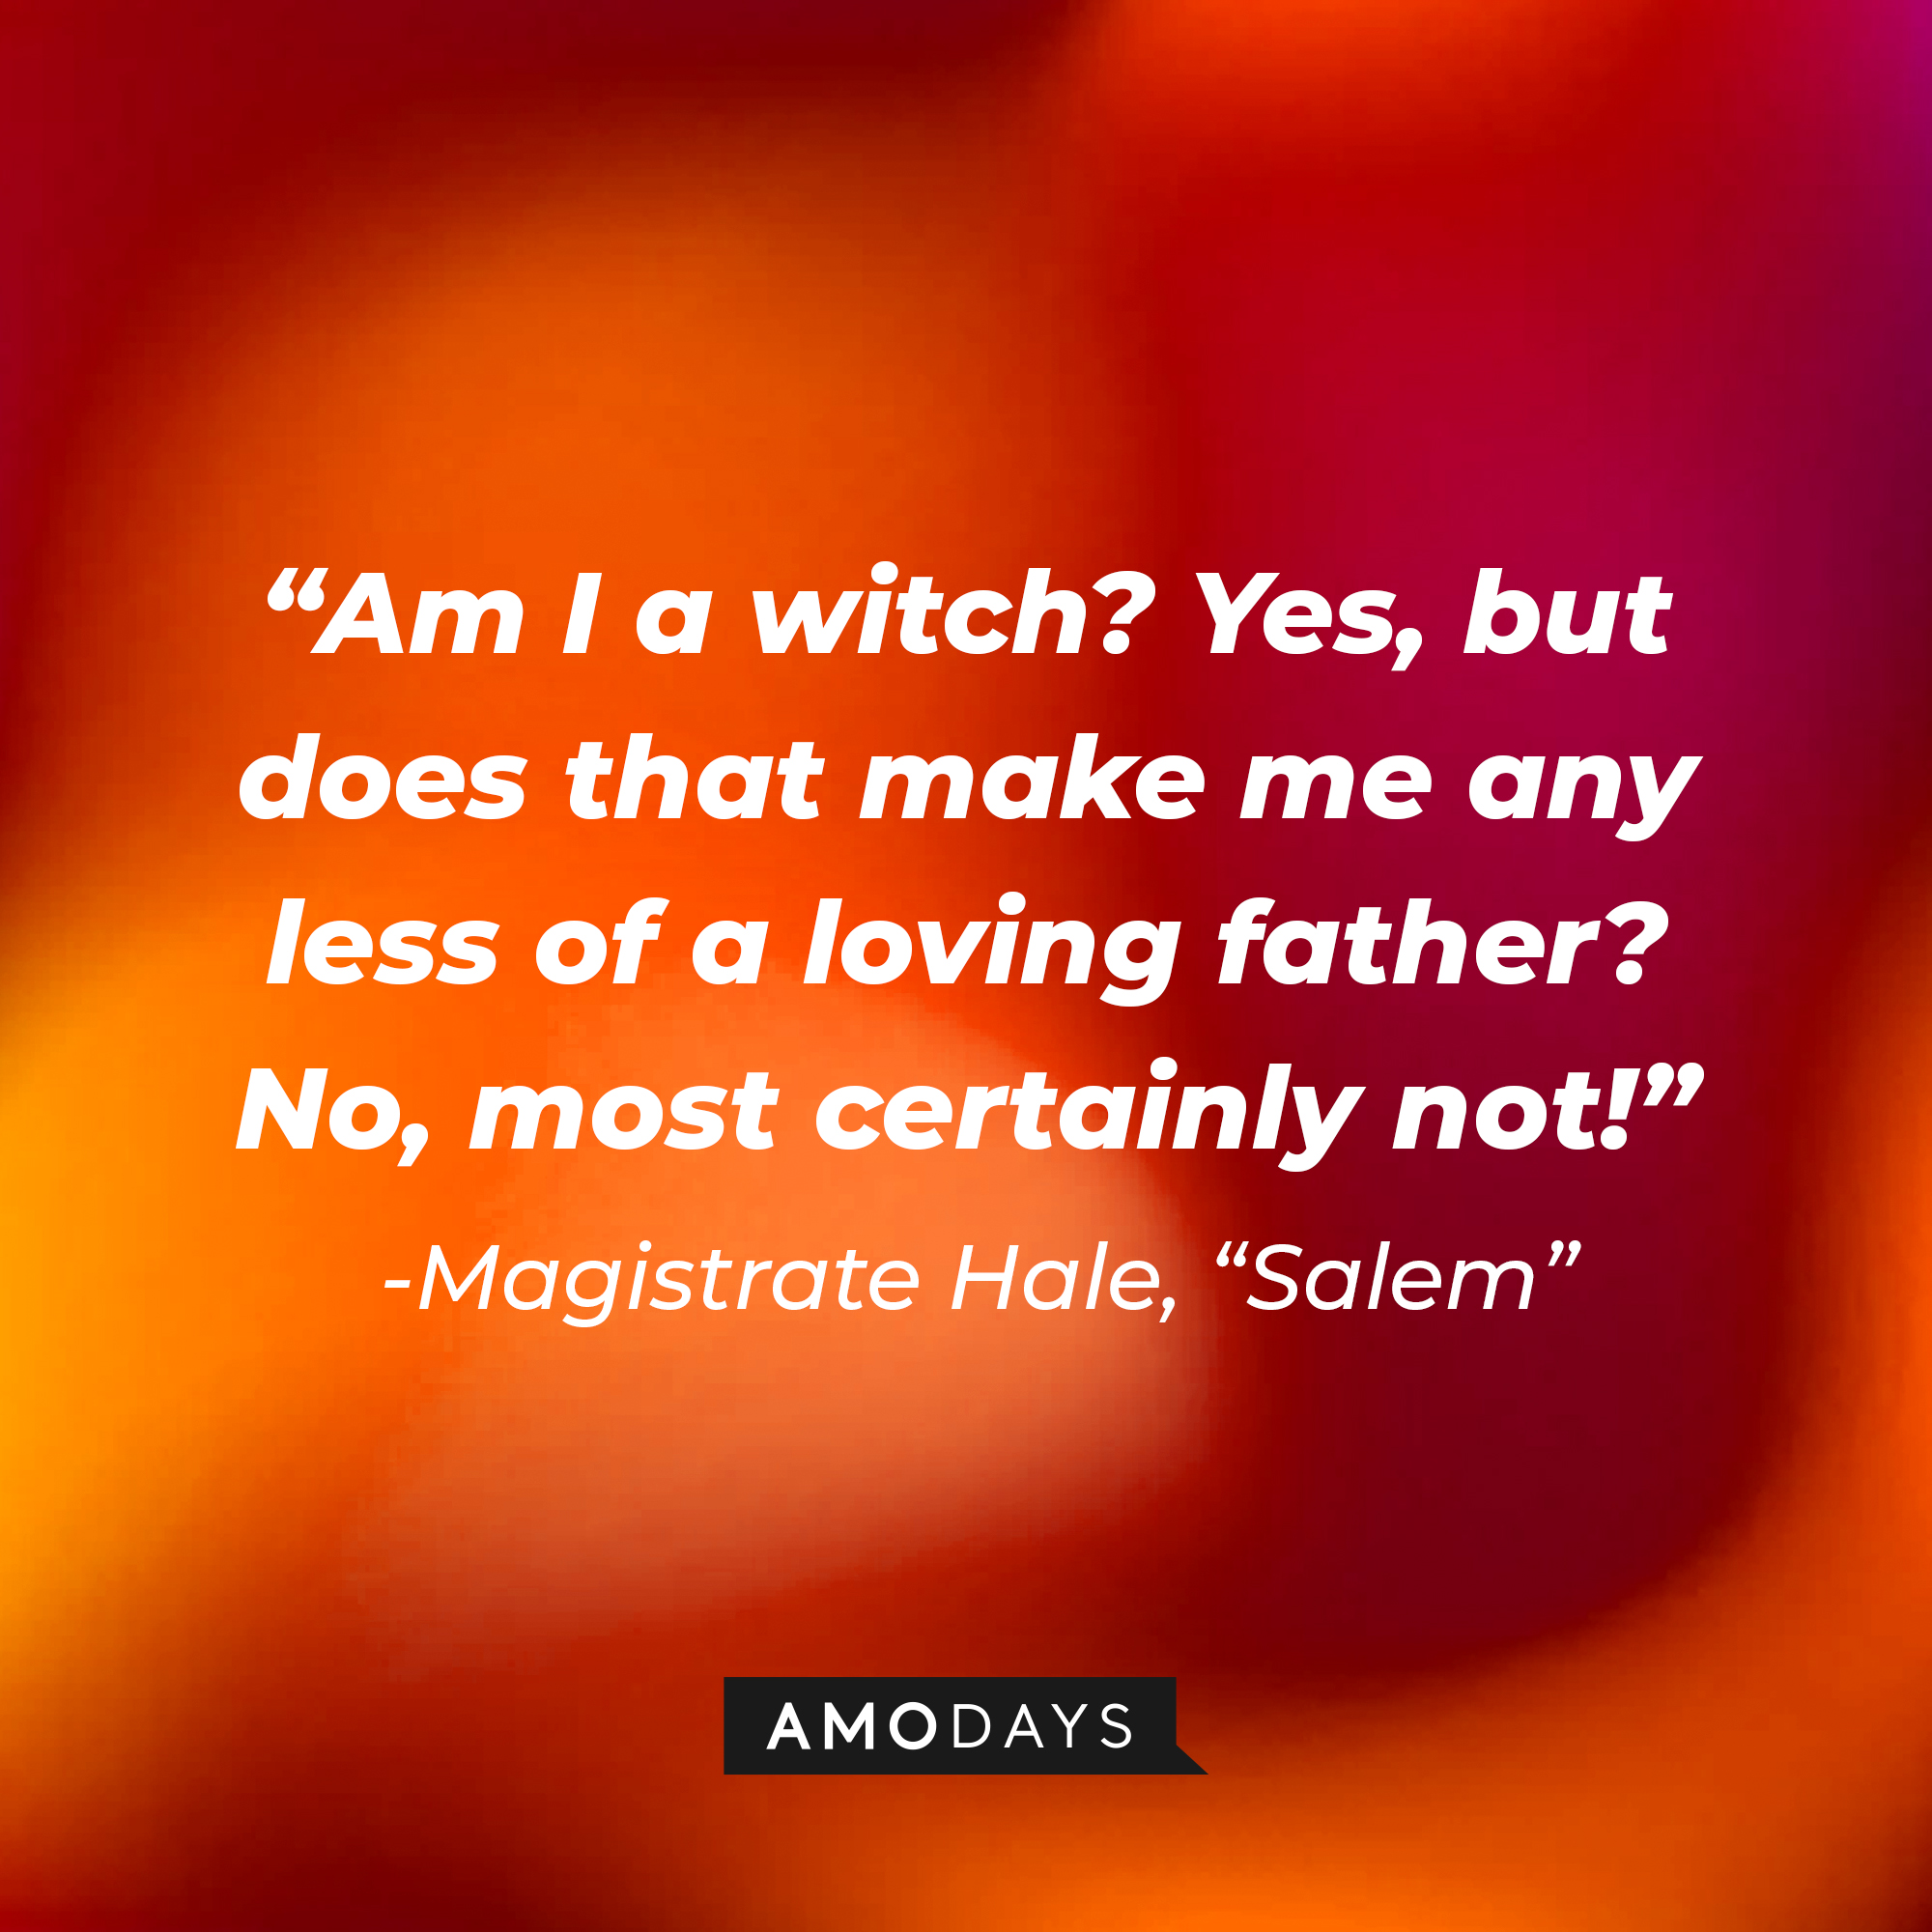 Magistrate Hale's quote: "Am I a witch? Yes, but does that make me any less of a loving father? No, most certainly not!" | Source: Amodays